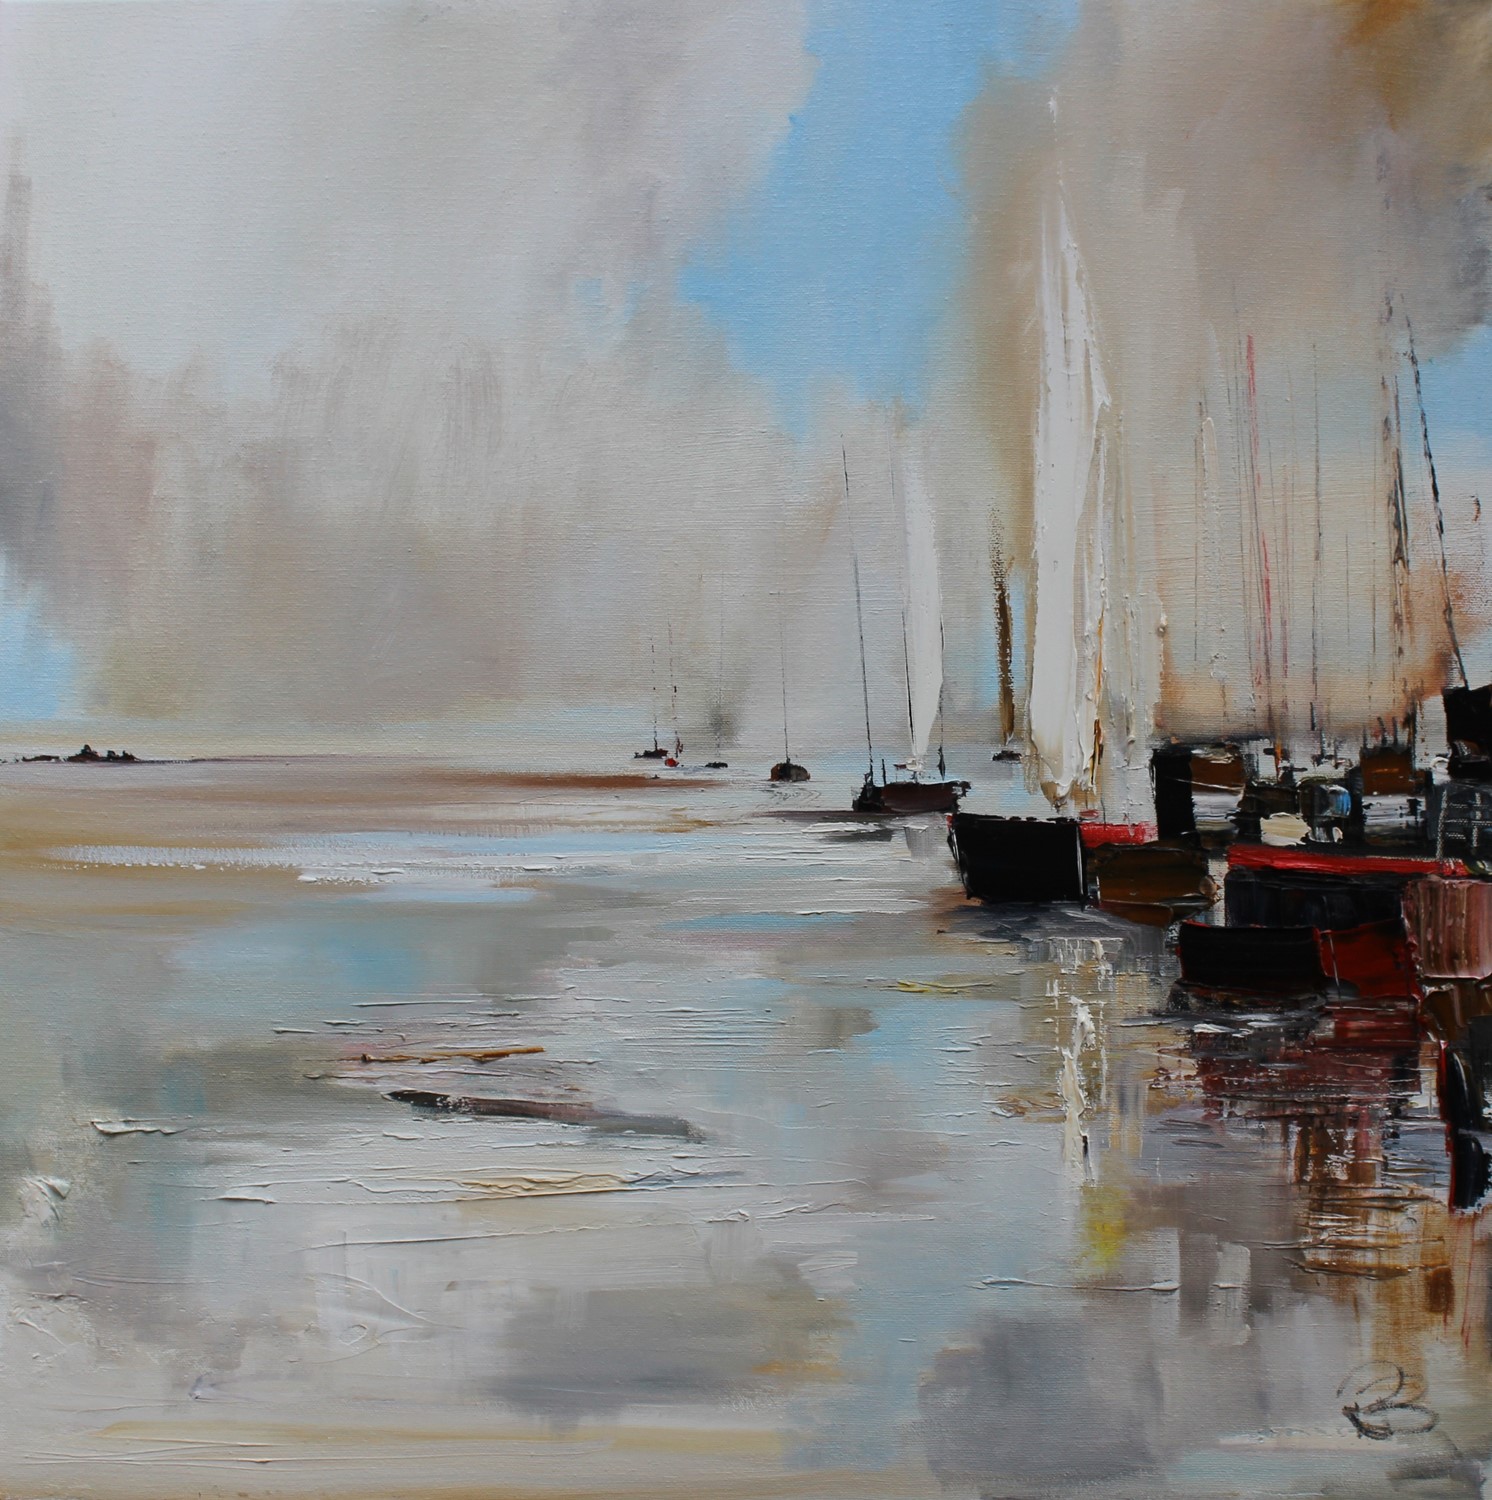 'Gathered at the Quay' by artist Rosanne Barr